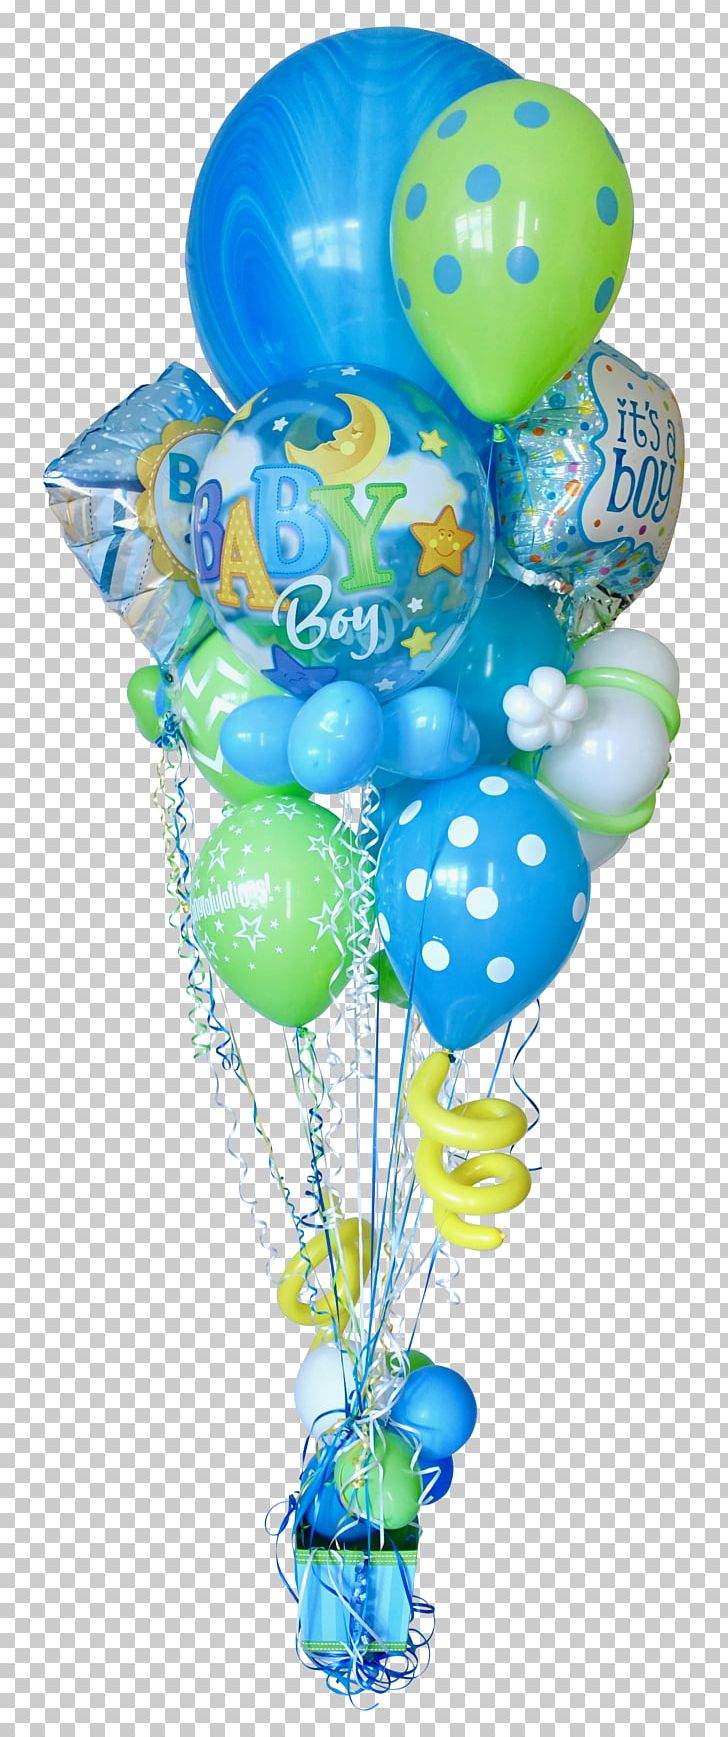 Toy Balloon Microsoft Azure Turquoise Party PNG, Clipart, Balloon, Its A Boy, Microsoft Azure, Party, Party Supply Free PNG Download